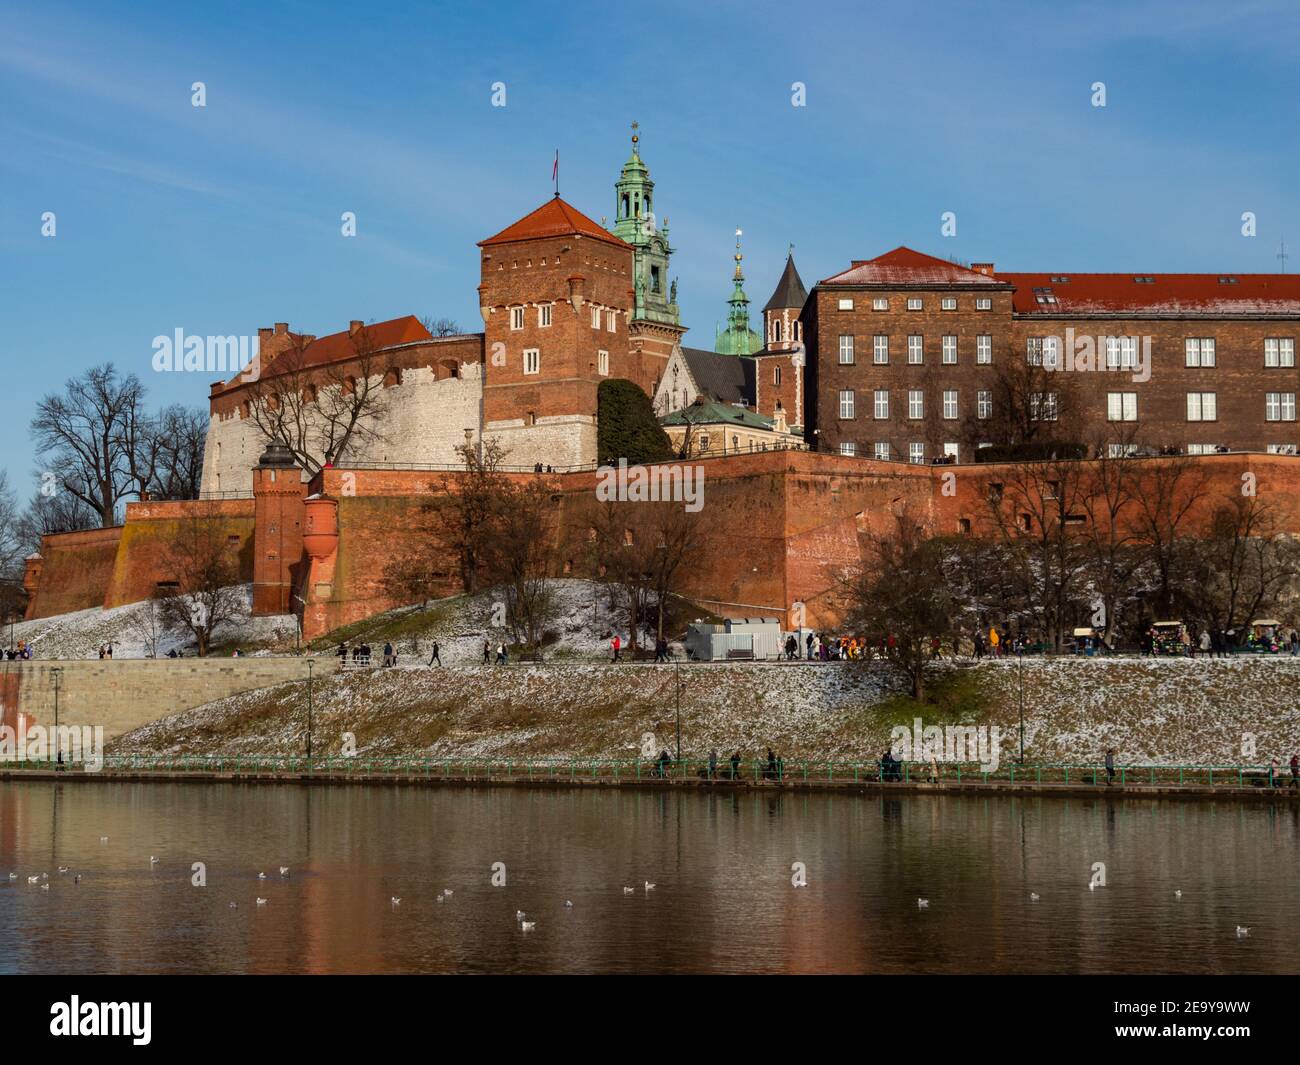 31/01/2021 - Poland/Cracow - view over Vistula River and Wawel Castle, the biggest attraction of Cracow. Winter time Stock Photo